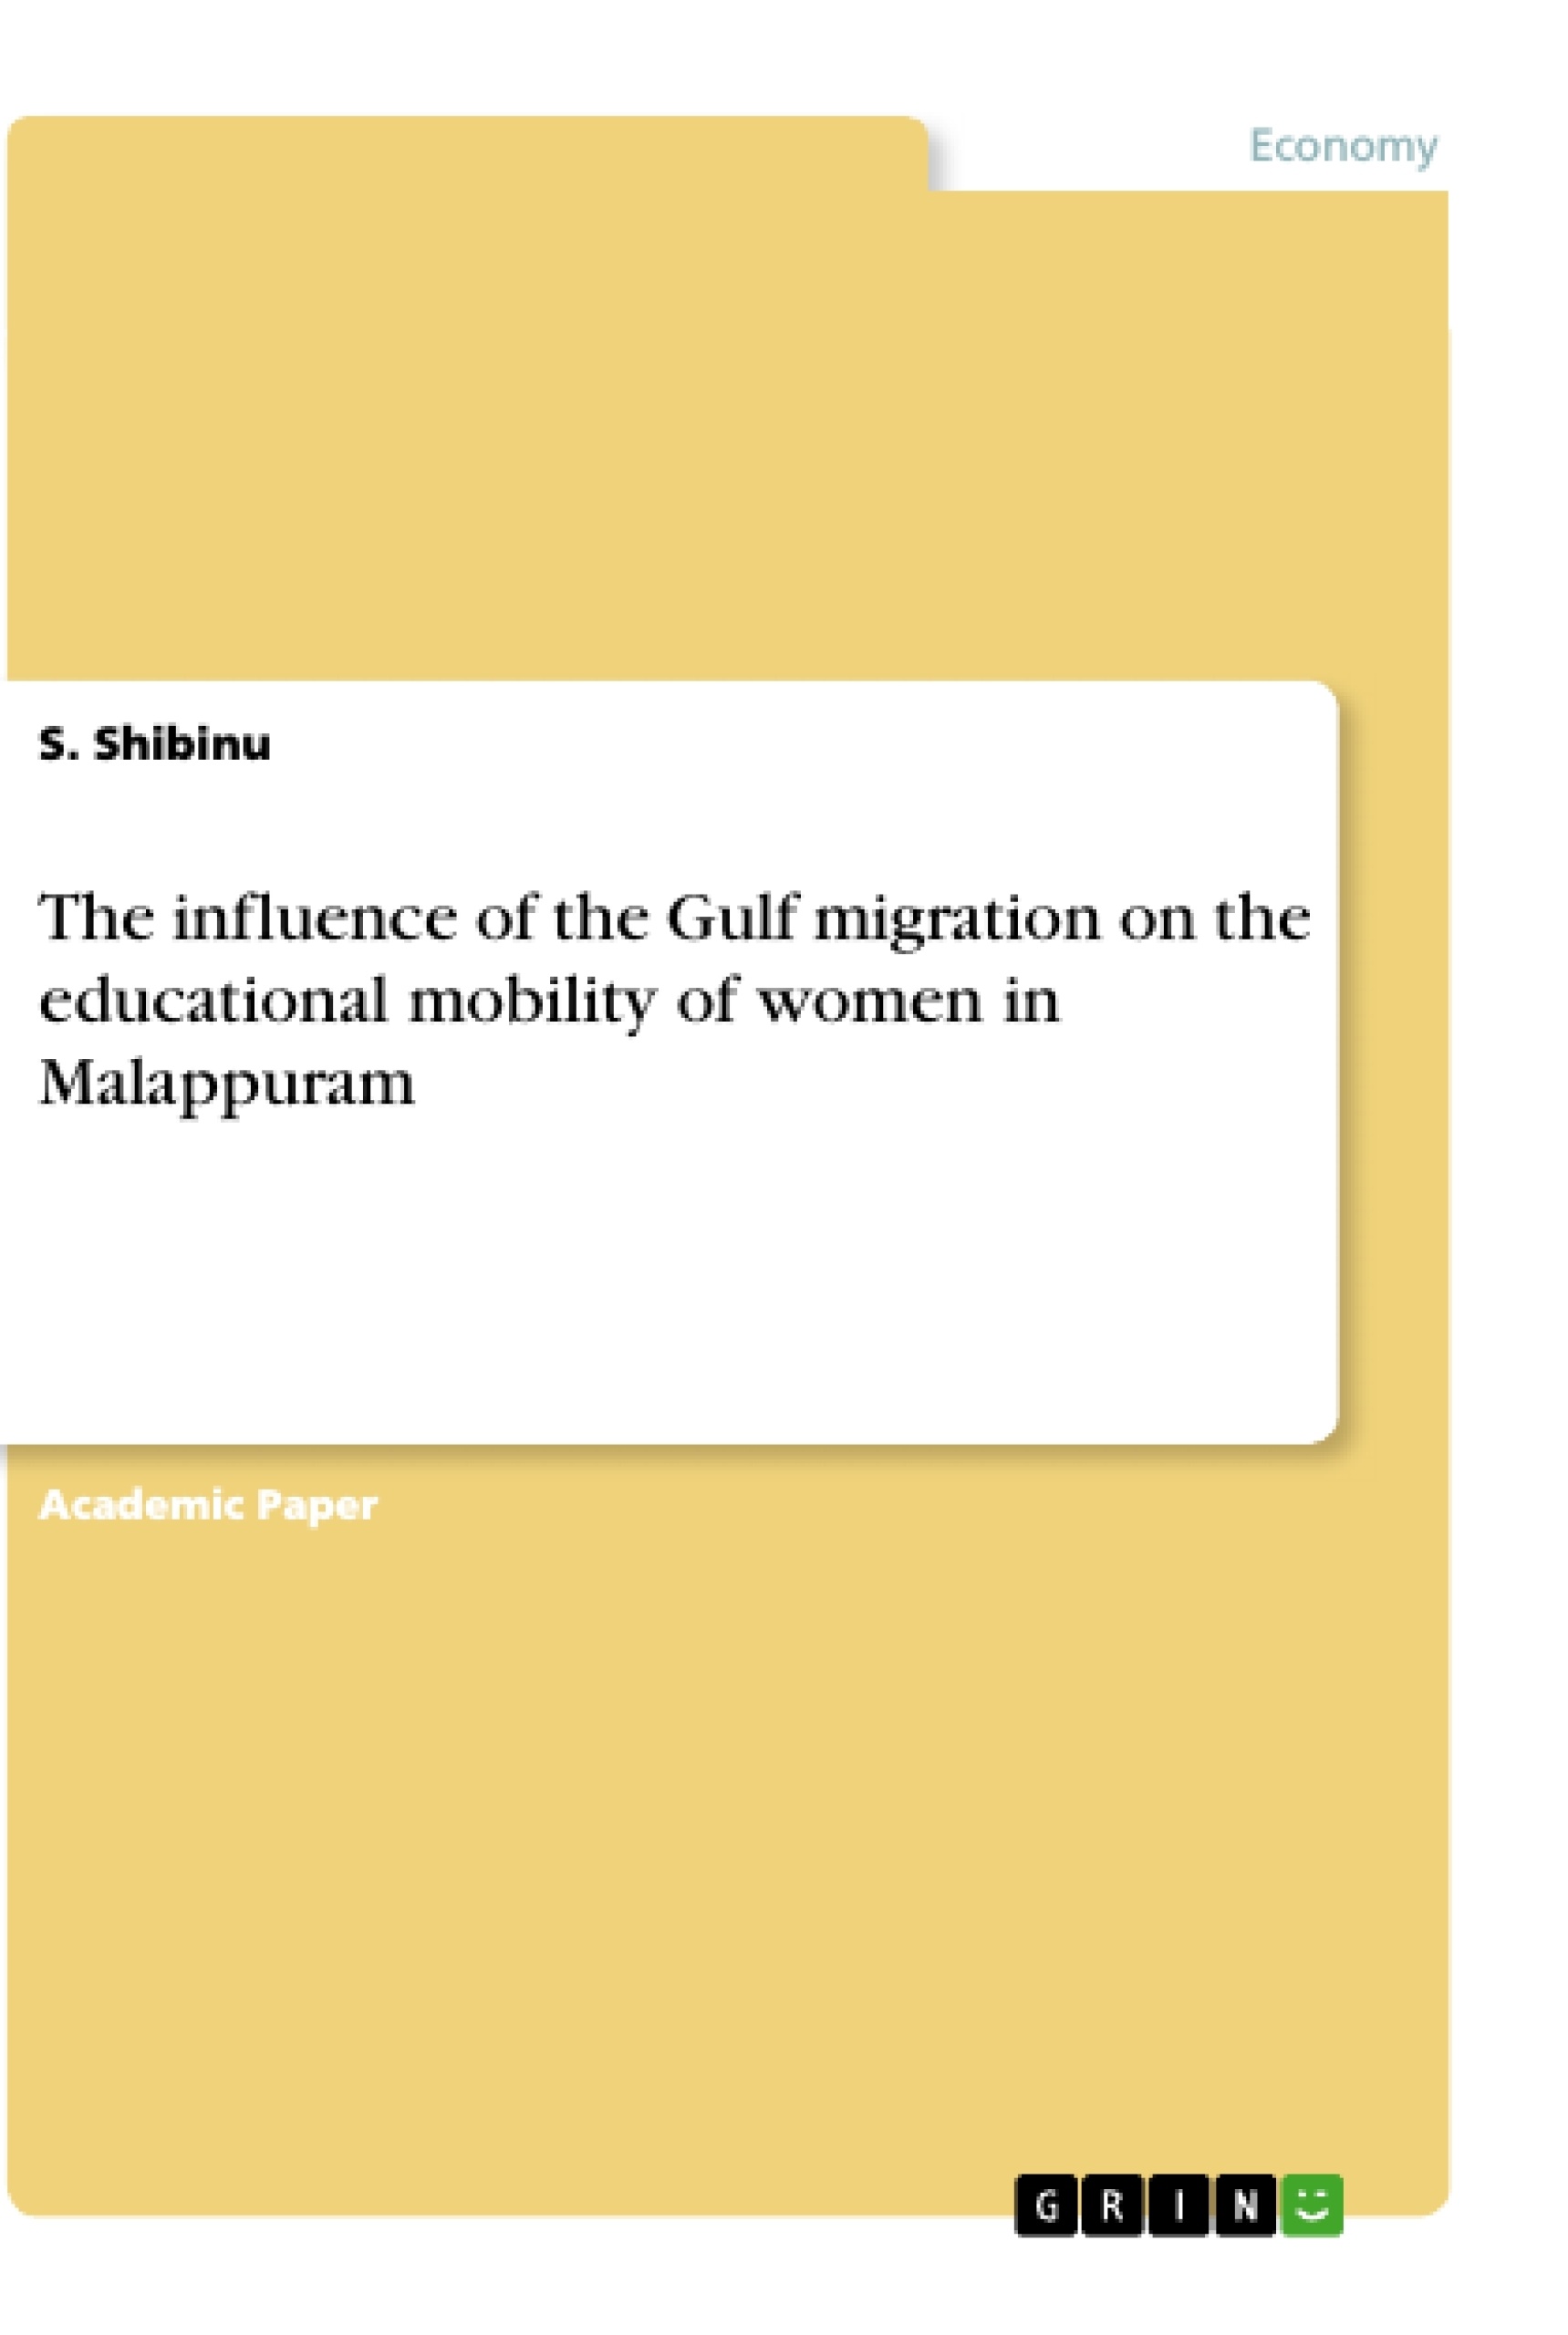 Título: The influence of the Gulf migration on the educational mobility of women in Malappuram